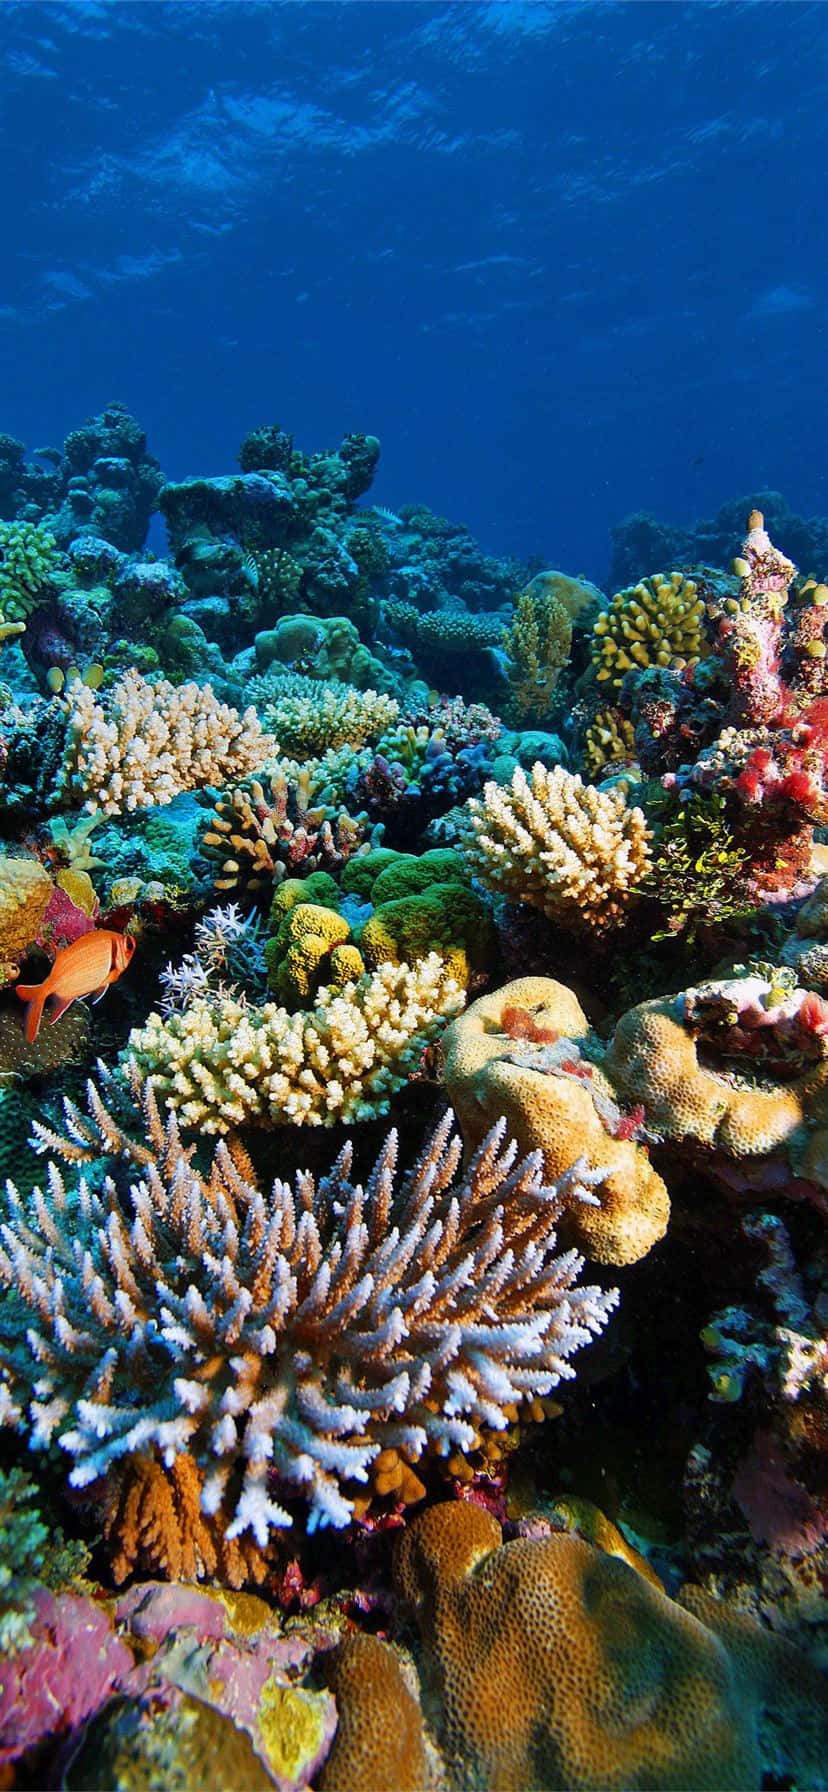 A breathtaking view of a vibrant coral reef